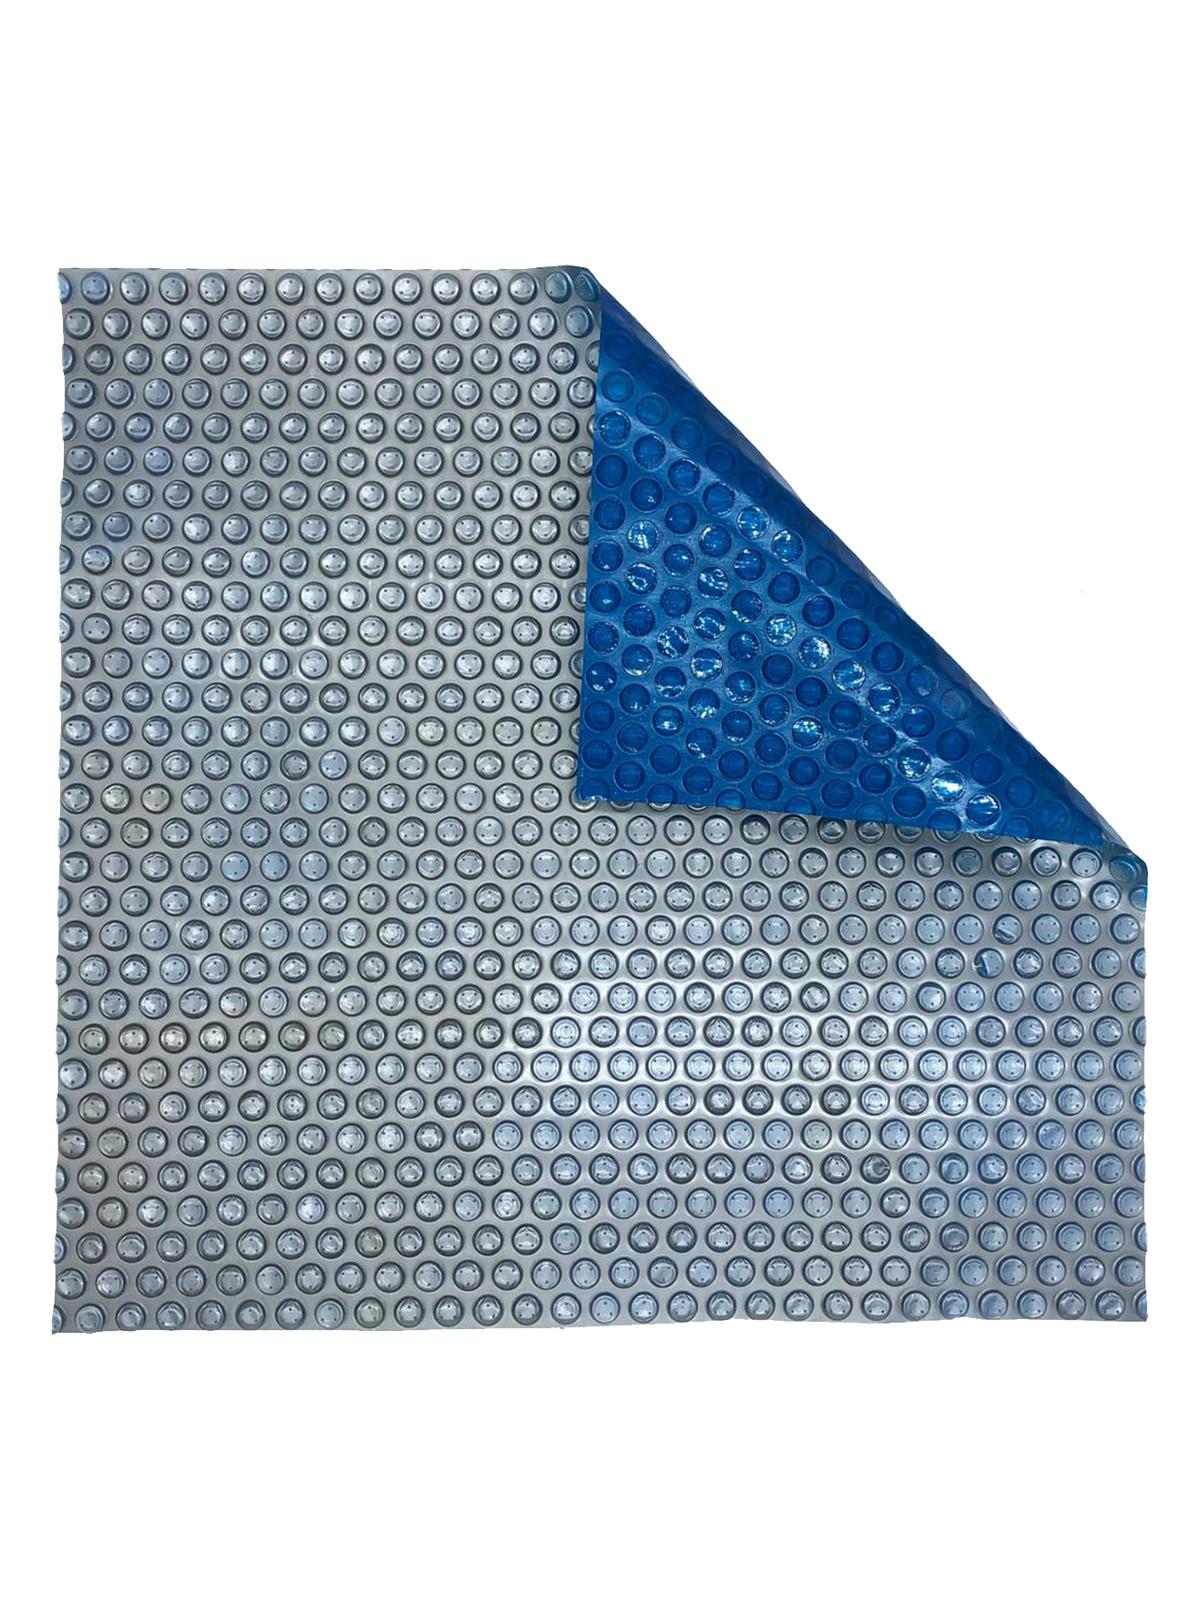 MIDWEST BLUE/SILVER 18X40 RECT 5YR 18x40 Rectangular IG Blue/Silver Spaceage Solar Cover 8 Mil